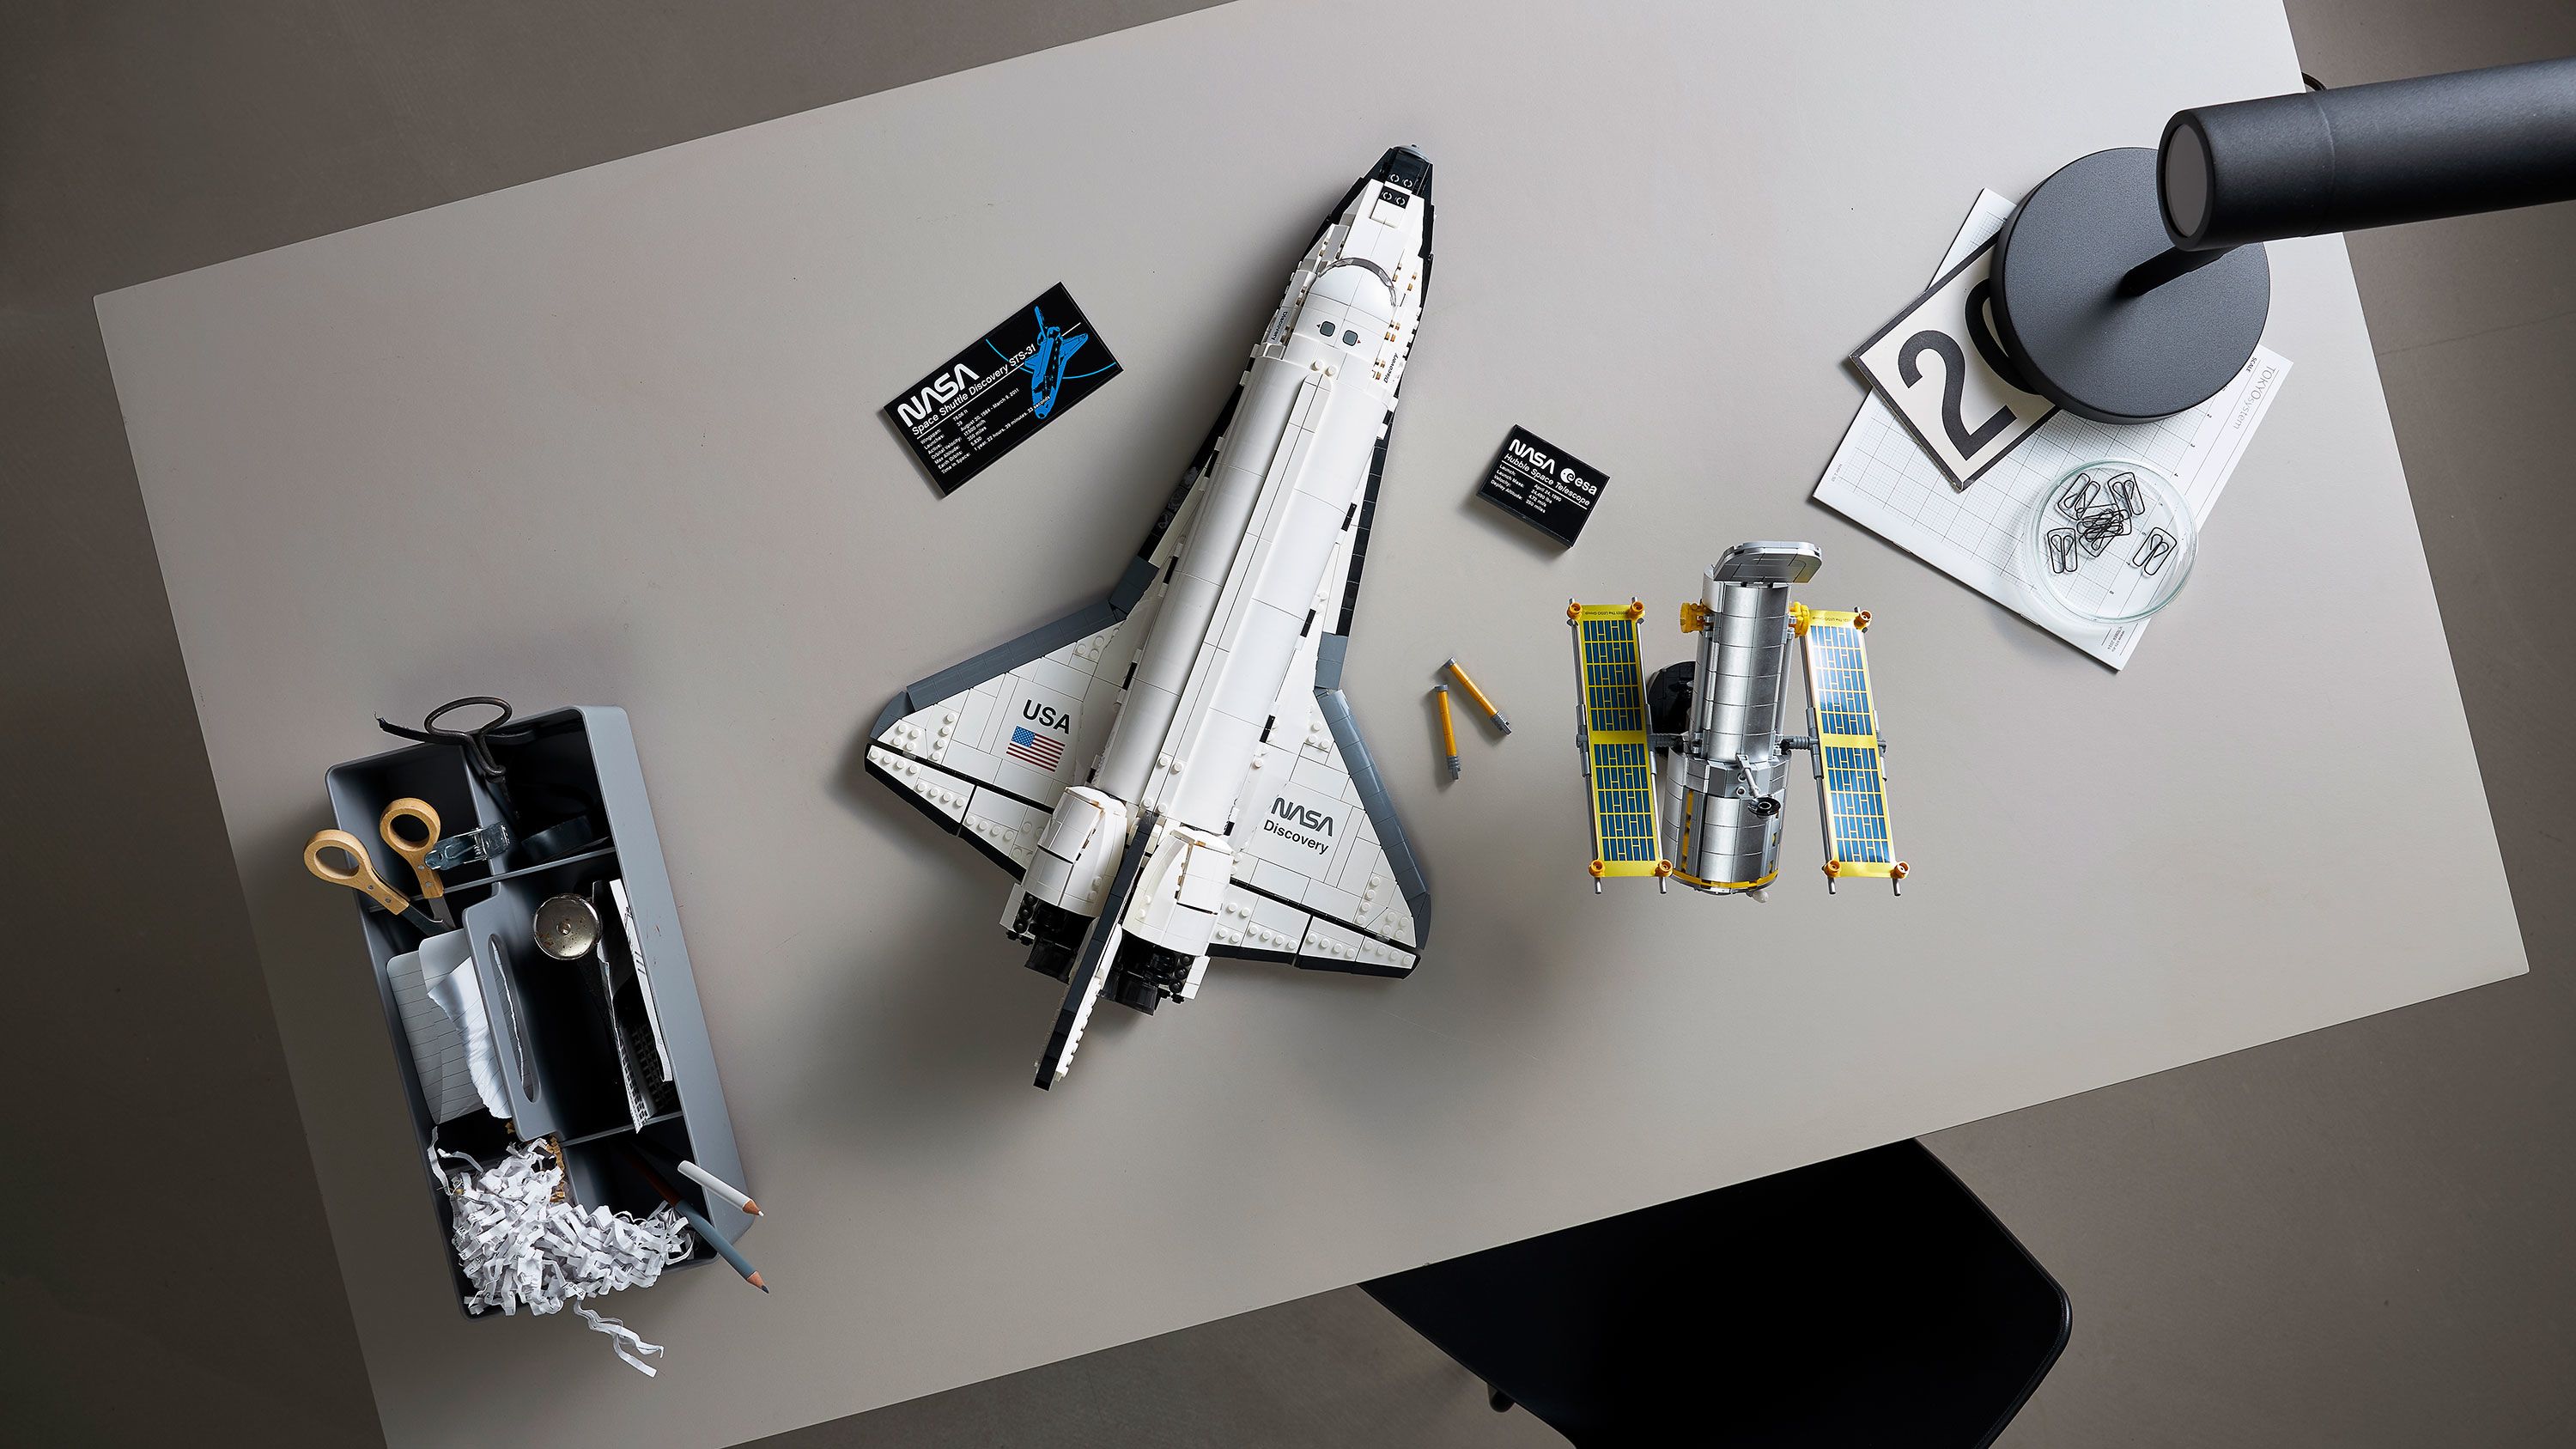 Lego's Space Shuttle Discovery: No trouble with Hubble, but the